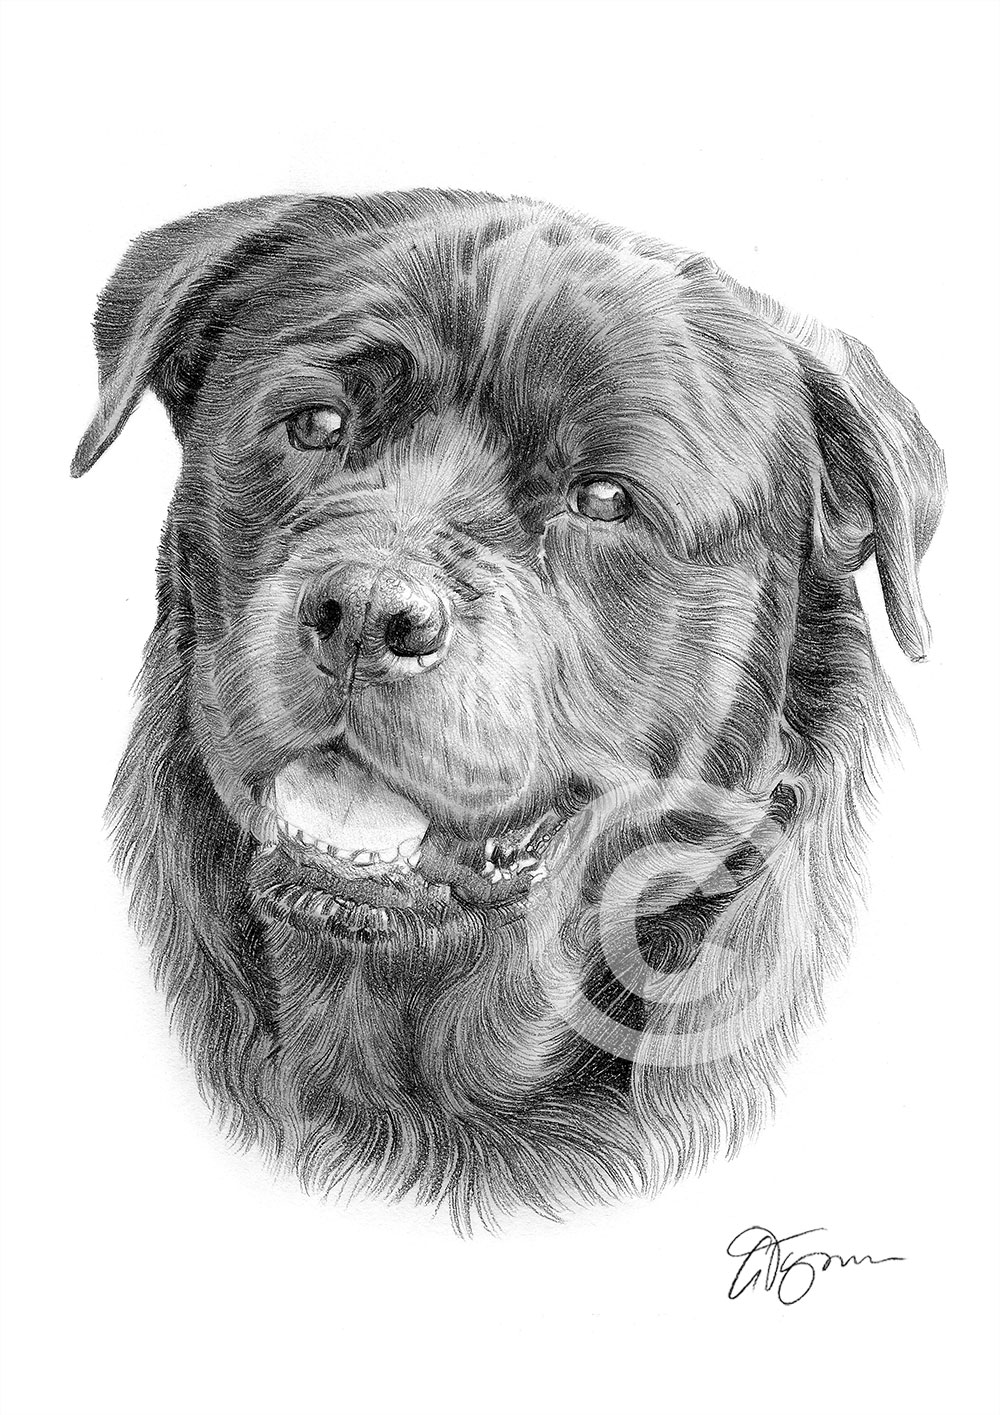 Pencil drawing of a Rottweiler by artist Gary Tymon